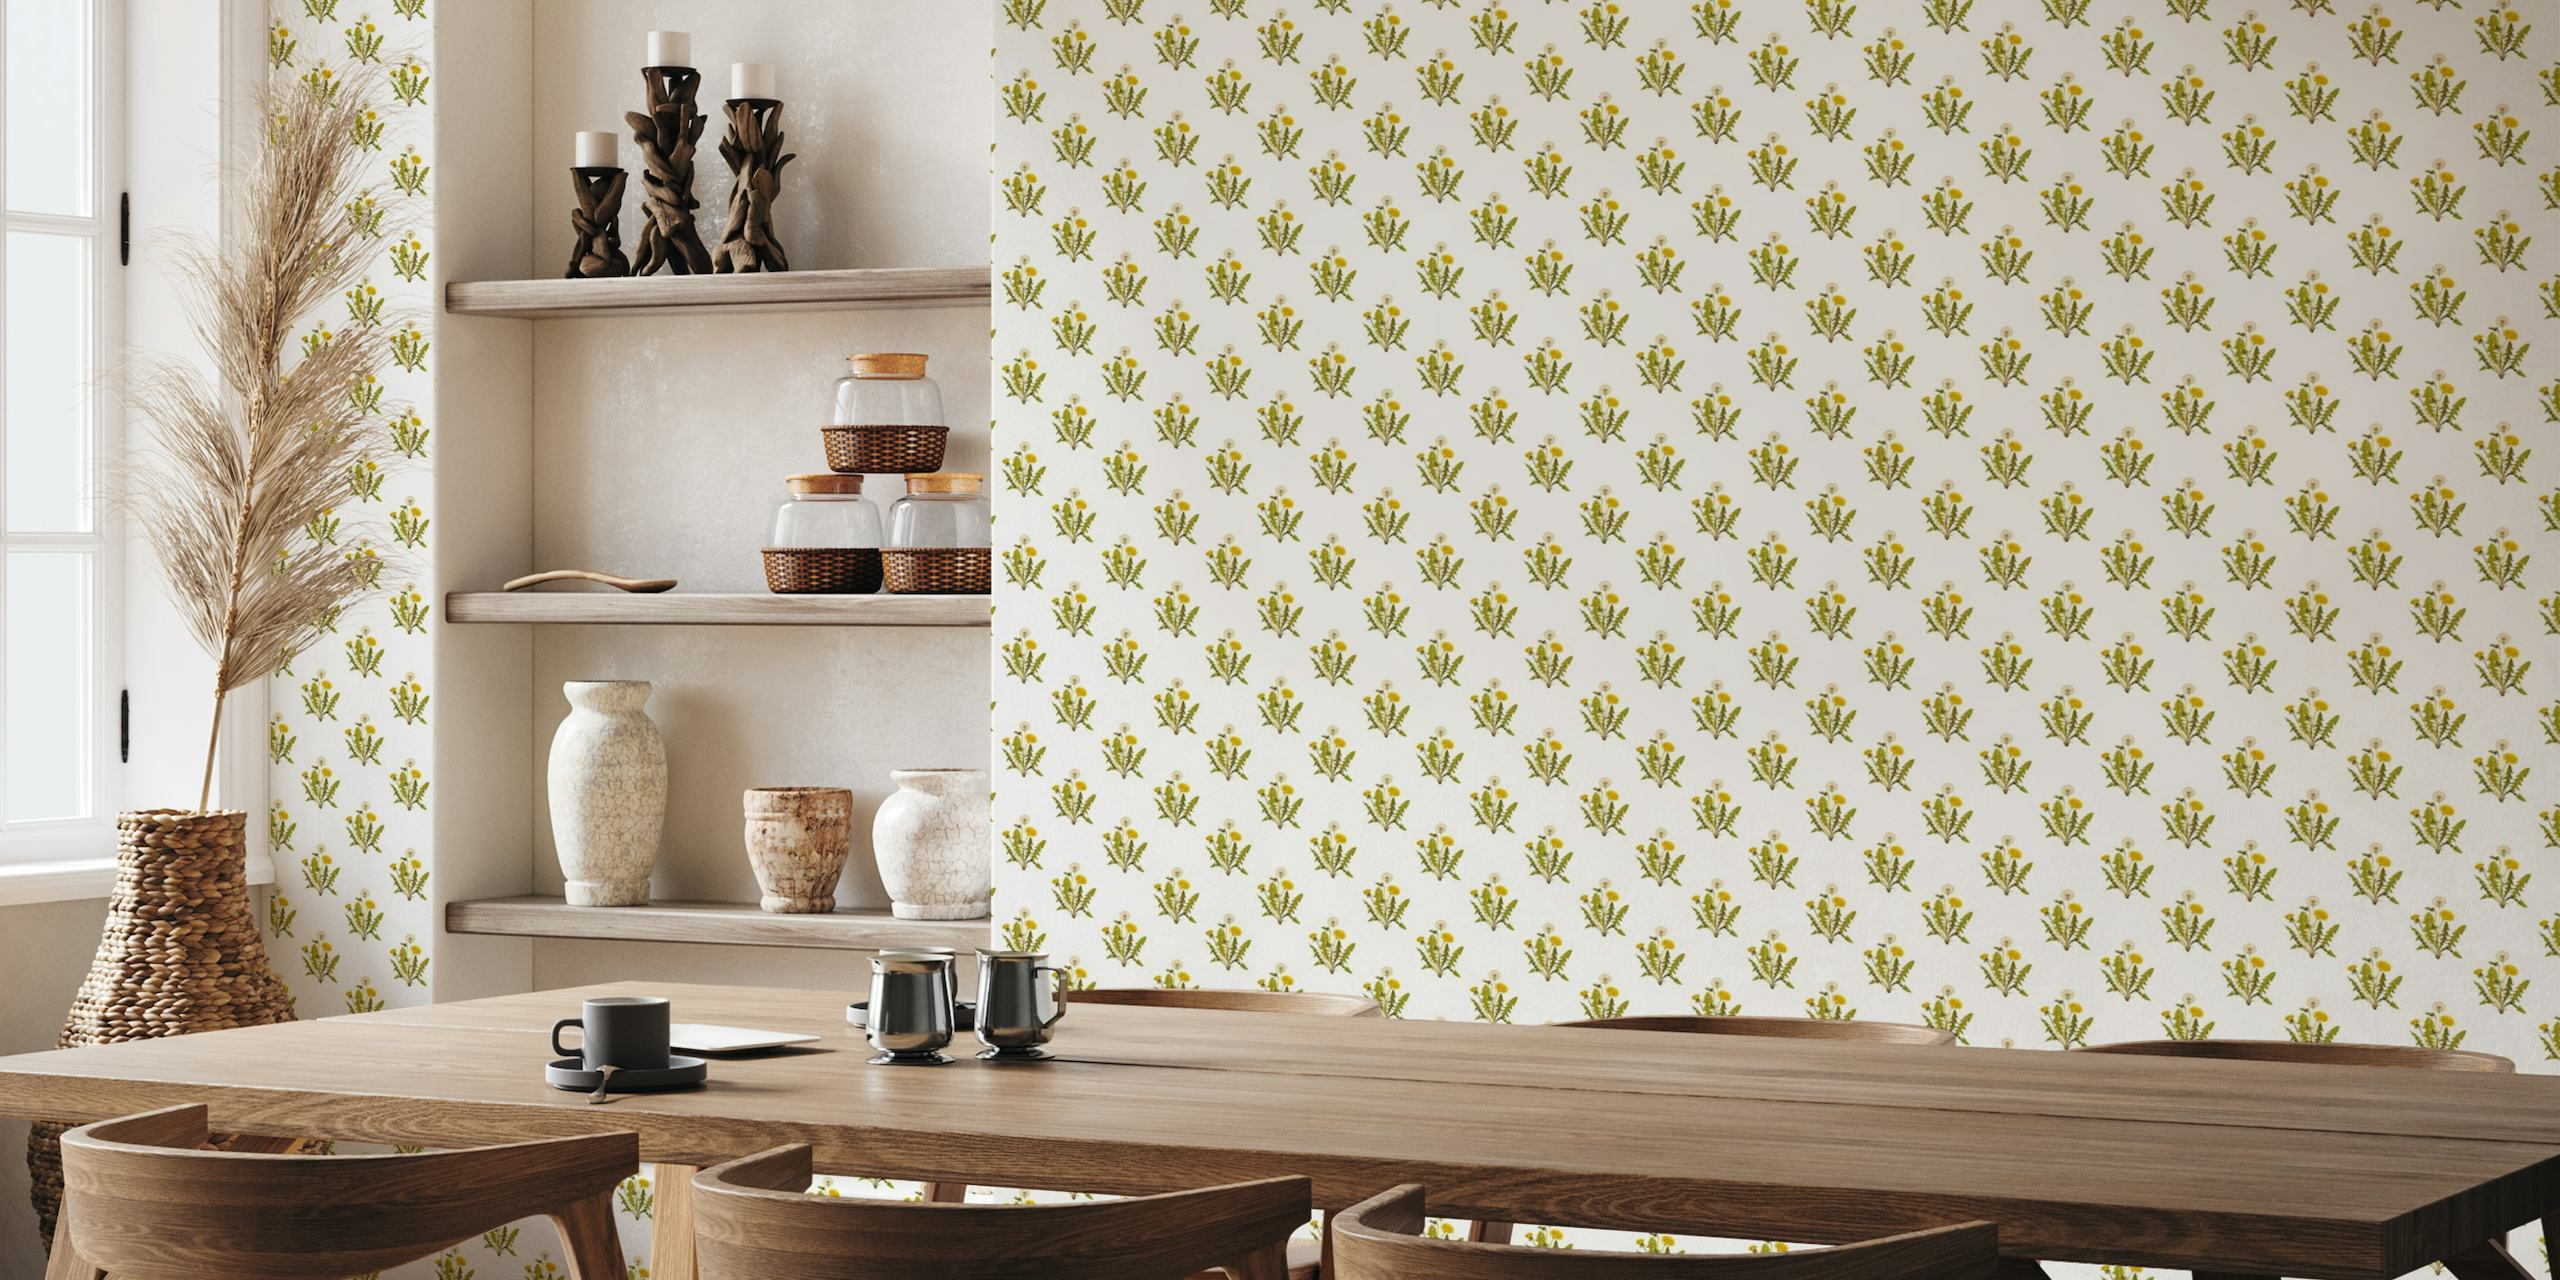 Cute dandelion pattern wallpaper featuring yellow blossoms and green stems on a neutral background